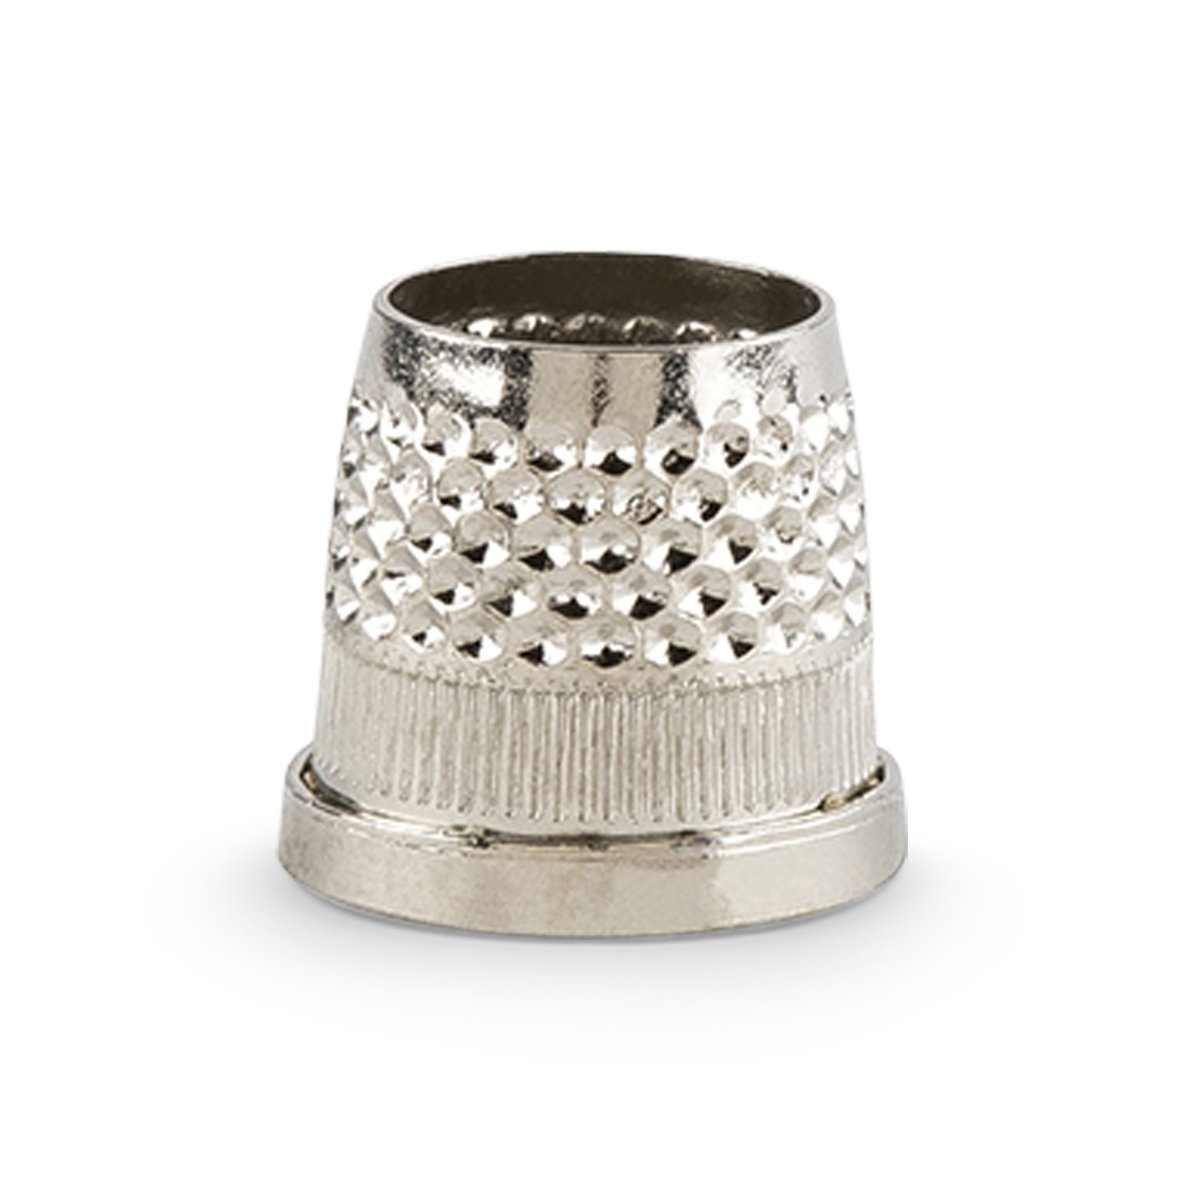 Metal Metal Thimble Leather Thimbles for Hand Sewing Sewing